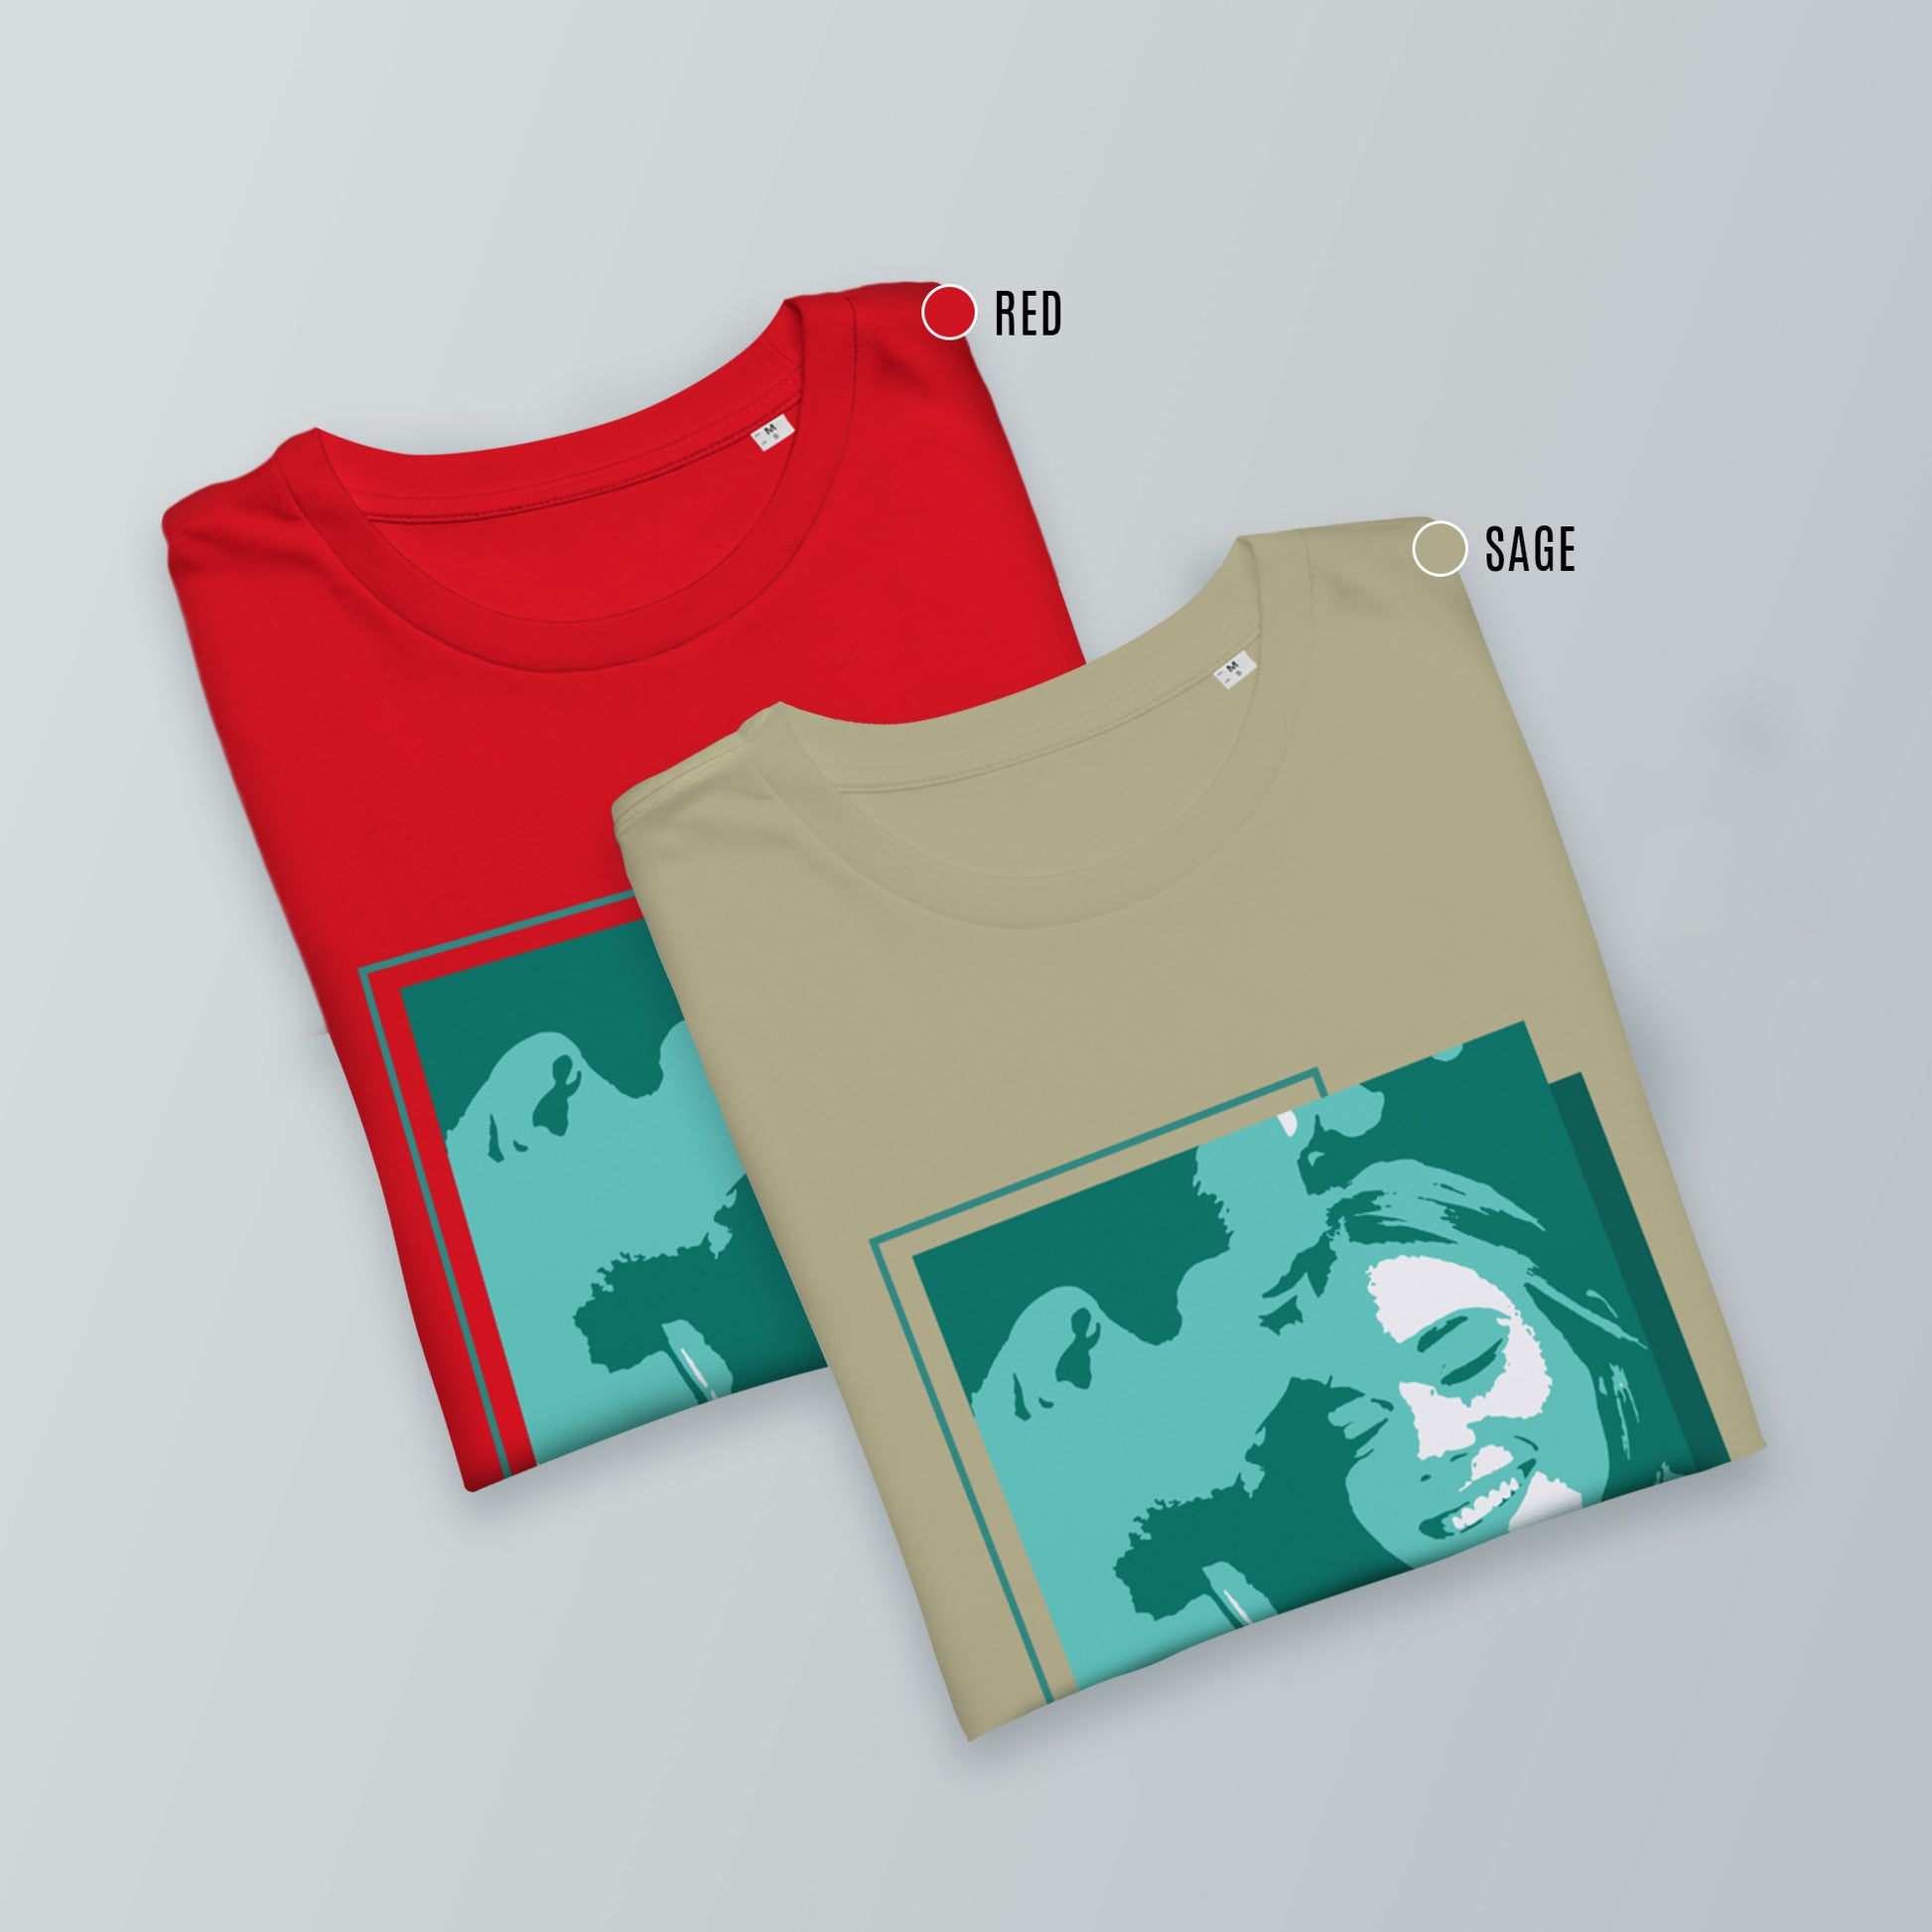 Personalized Men's T-Shirt in red and sage - Green Portrait | Seepu